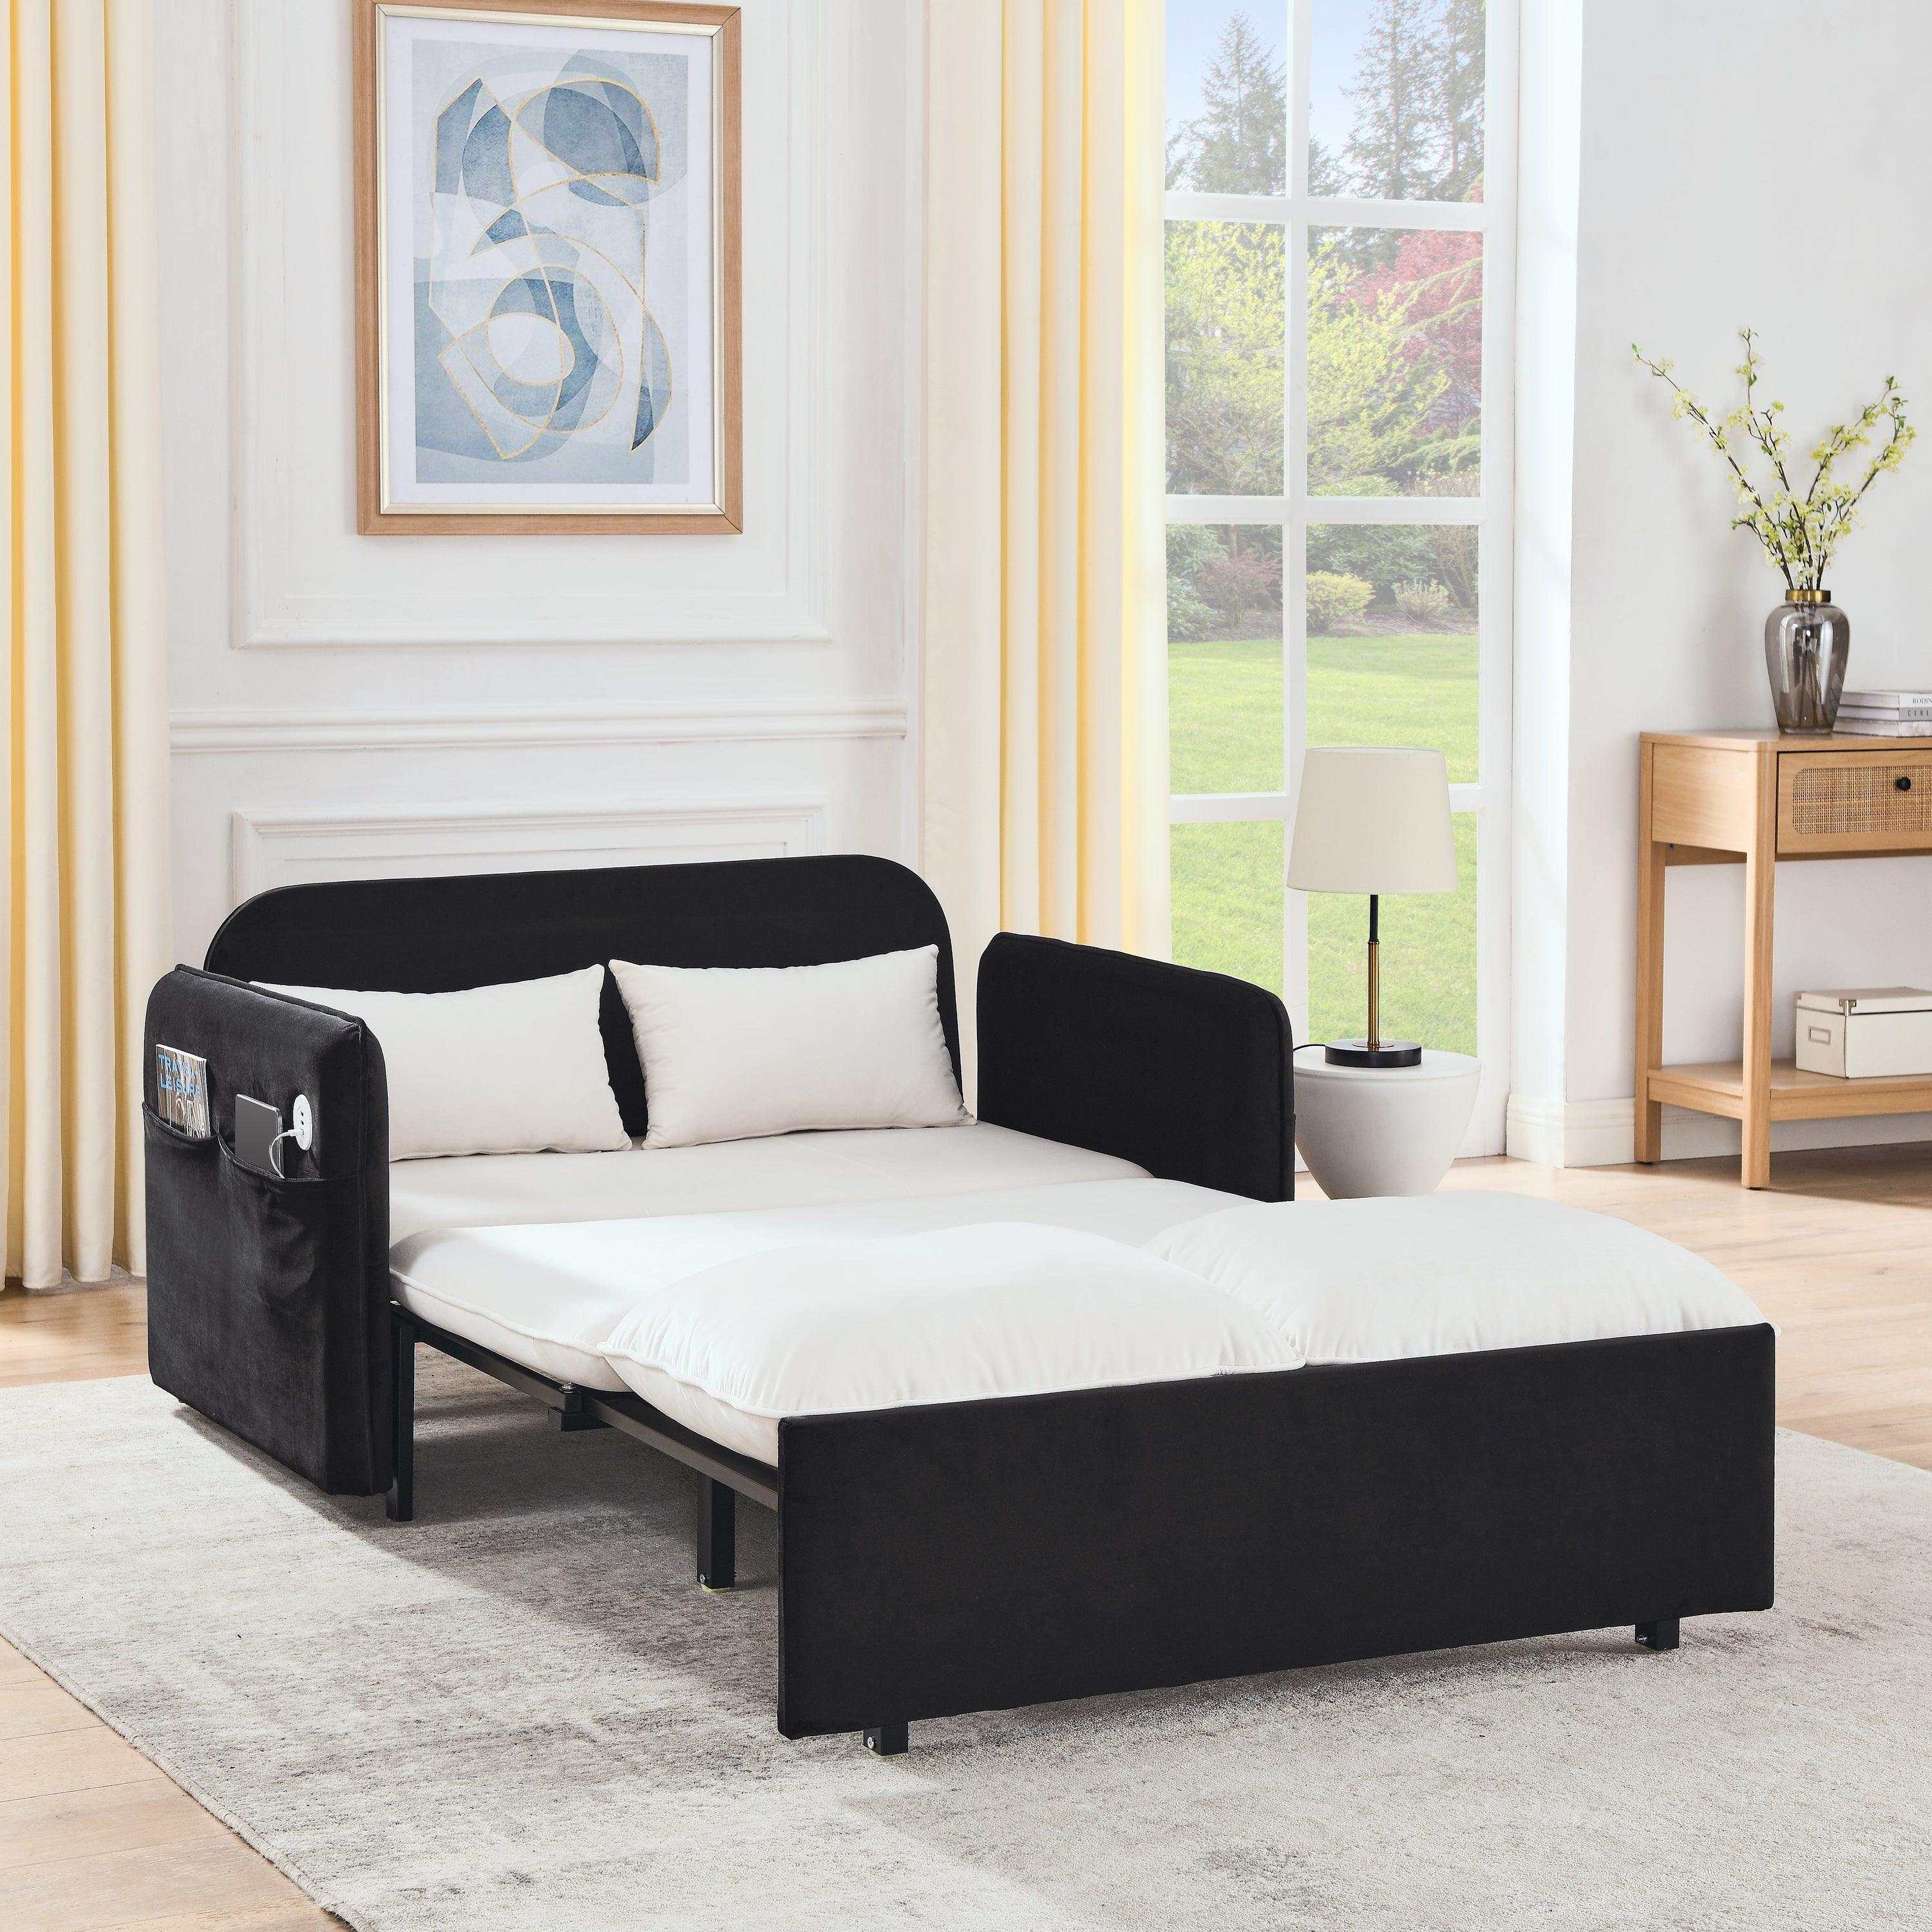 🆓🚛 53" Modern Convertible Sofa Bed W/2 Removable Armrests W/Usb Power Port, Velvet Recliner Adjustable Sofa W/Head Pull-Out Bed, 2 Pillows, for Living Room Apartment Etc., White-Black